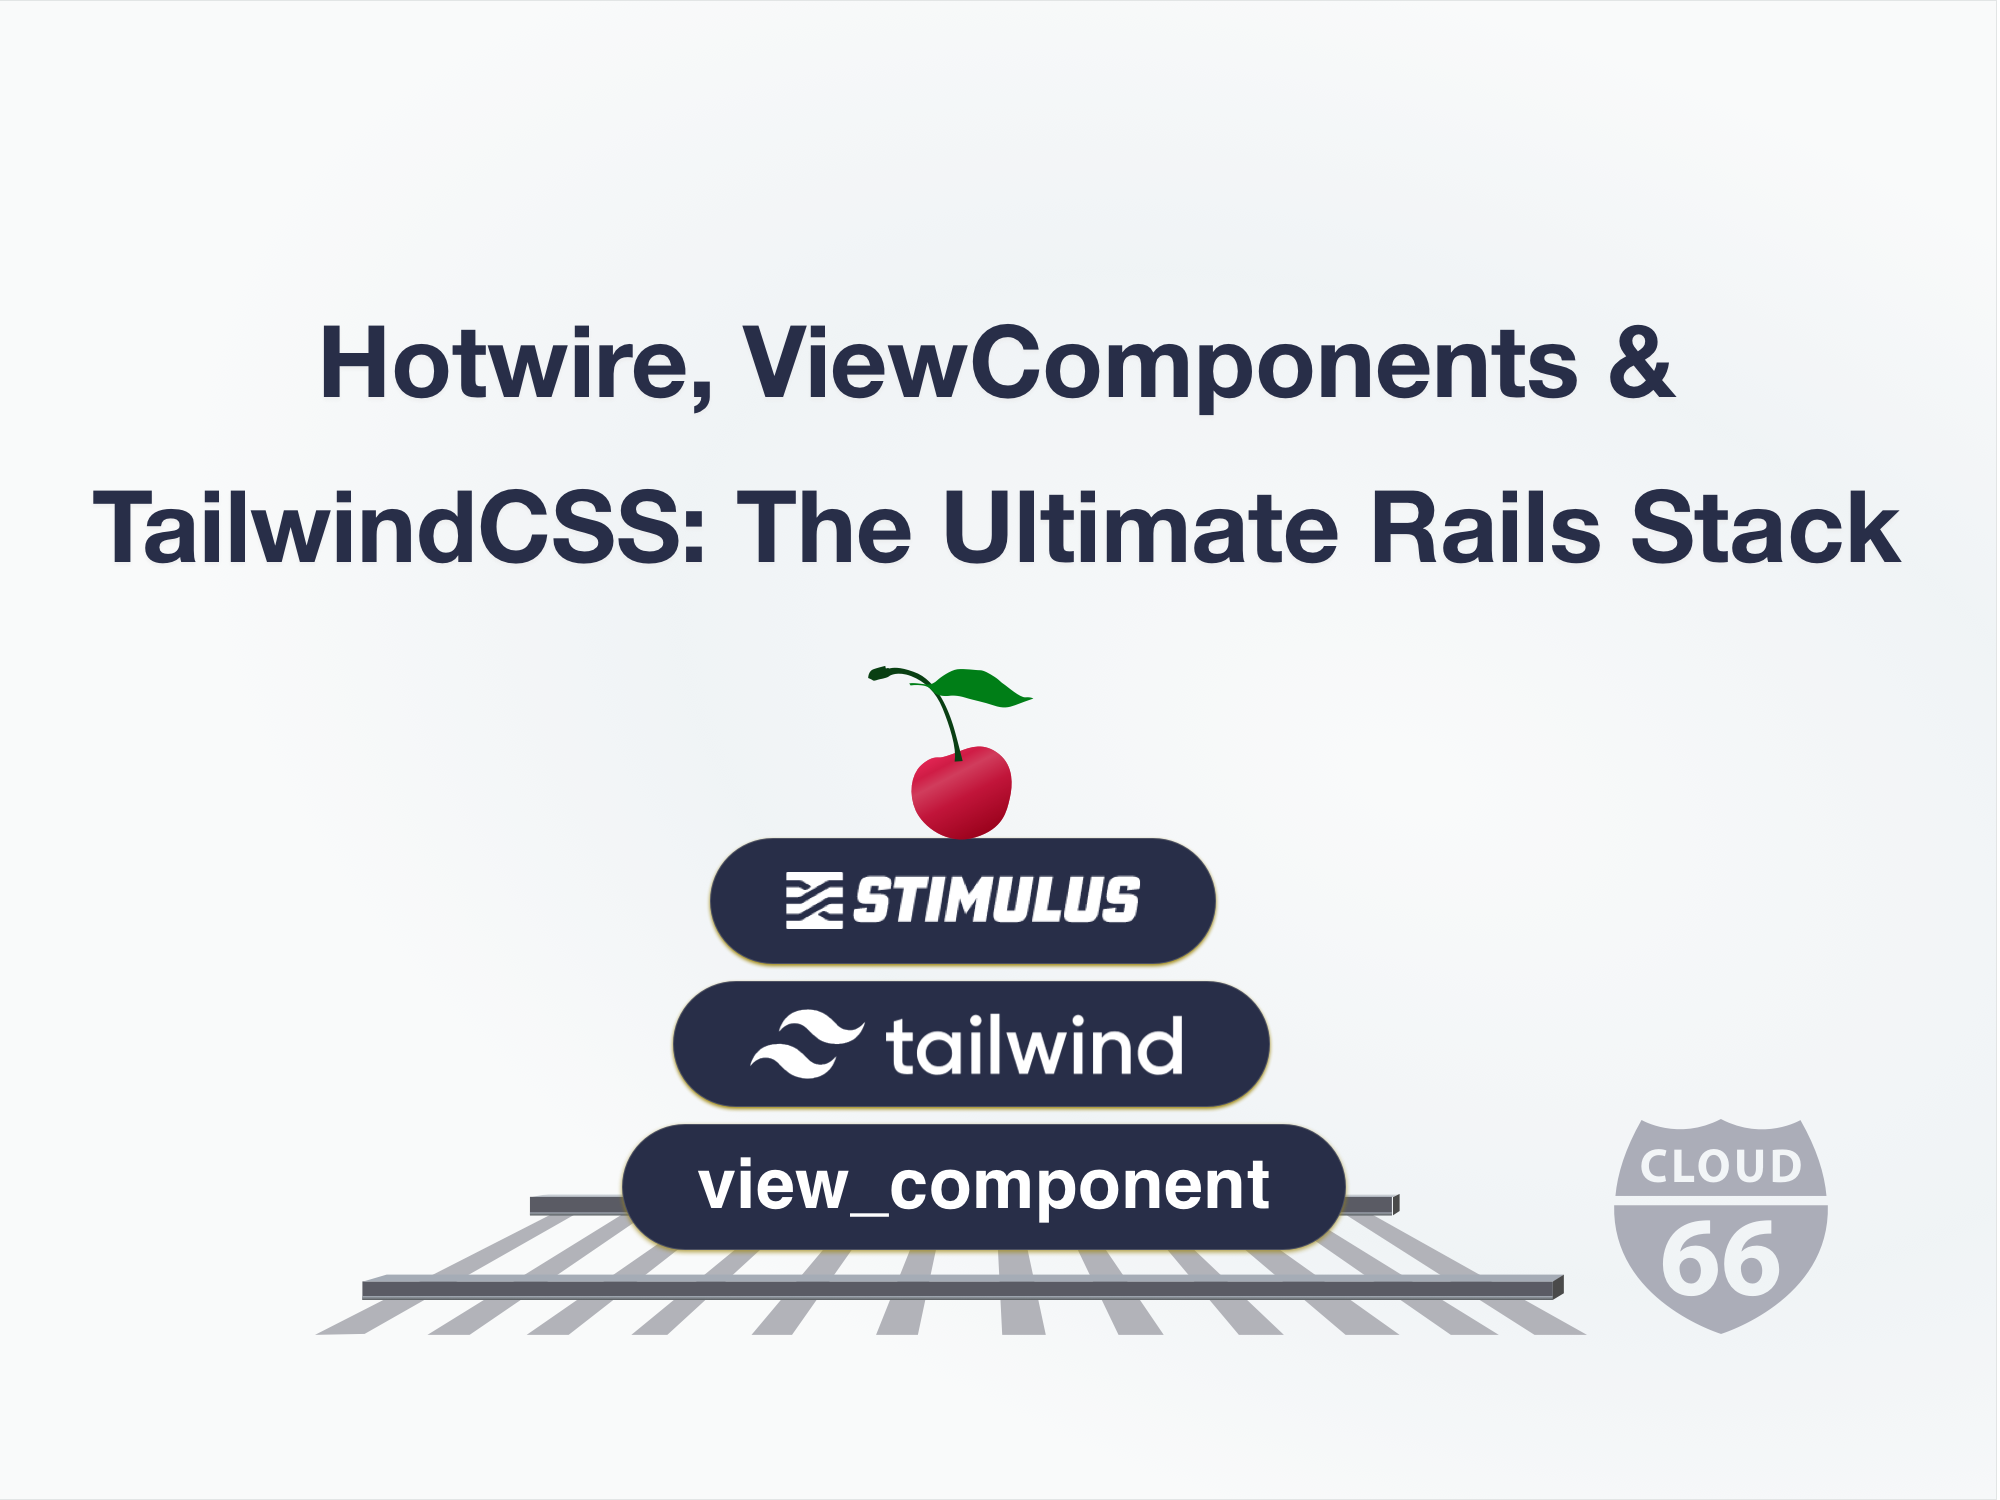 Hotwire, ViewComponents and TailwindCSS: The Ultimate Rails Stack